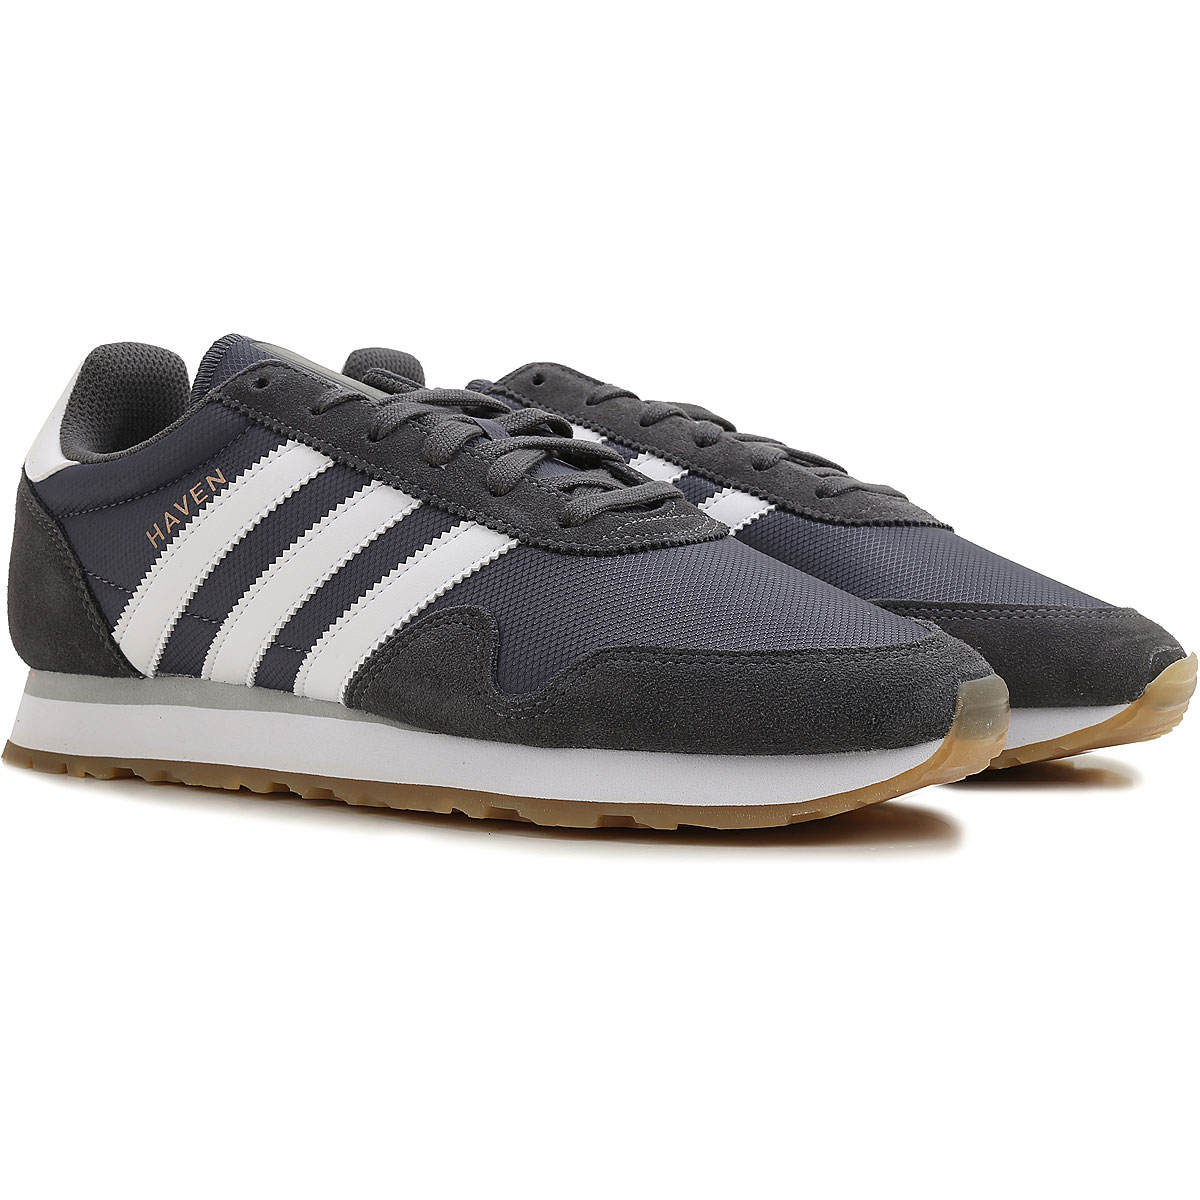 Mens Shoes Adidas, Style code: by9715-grey-